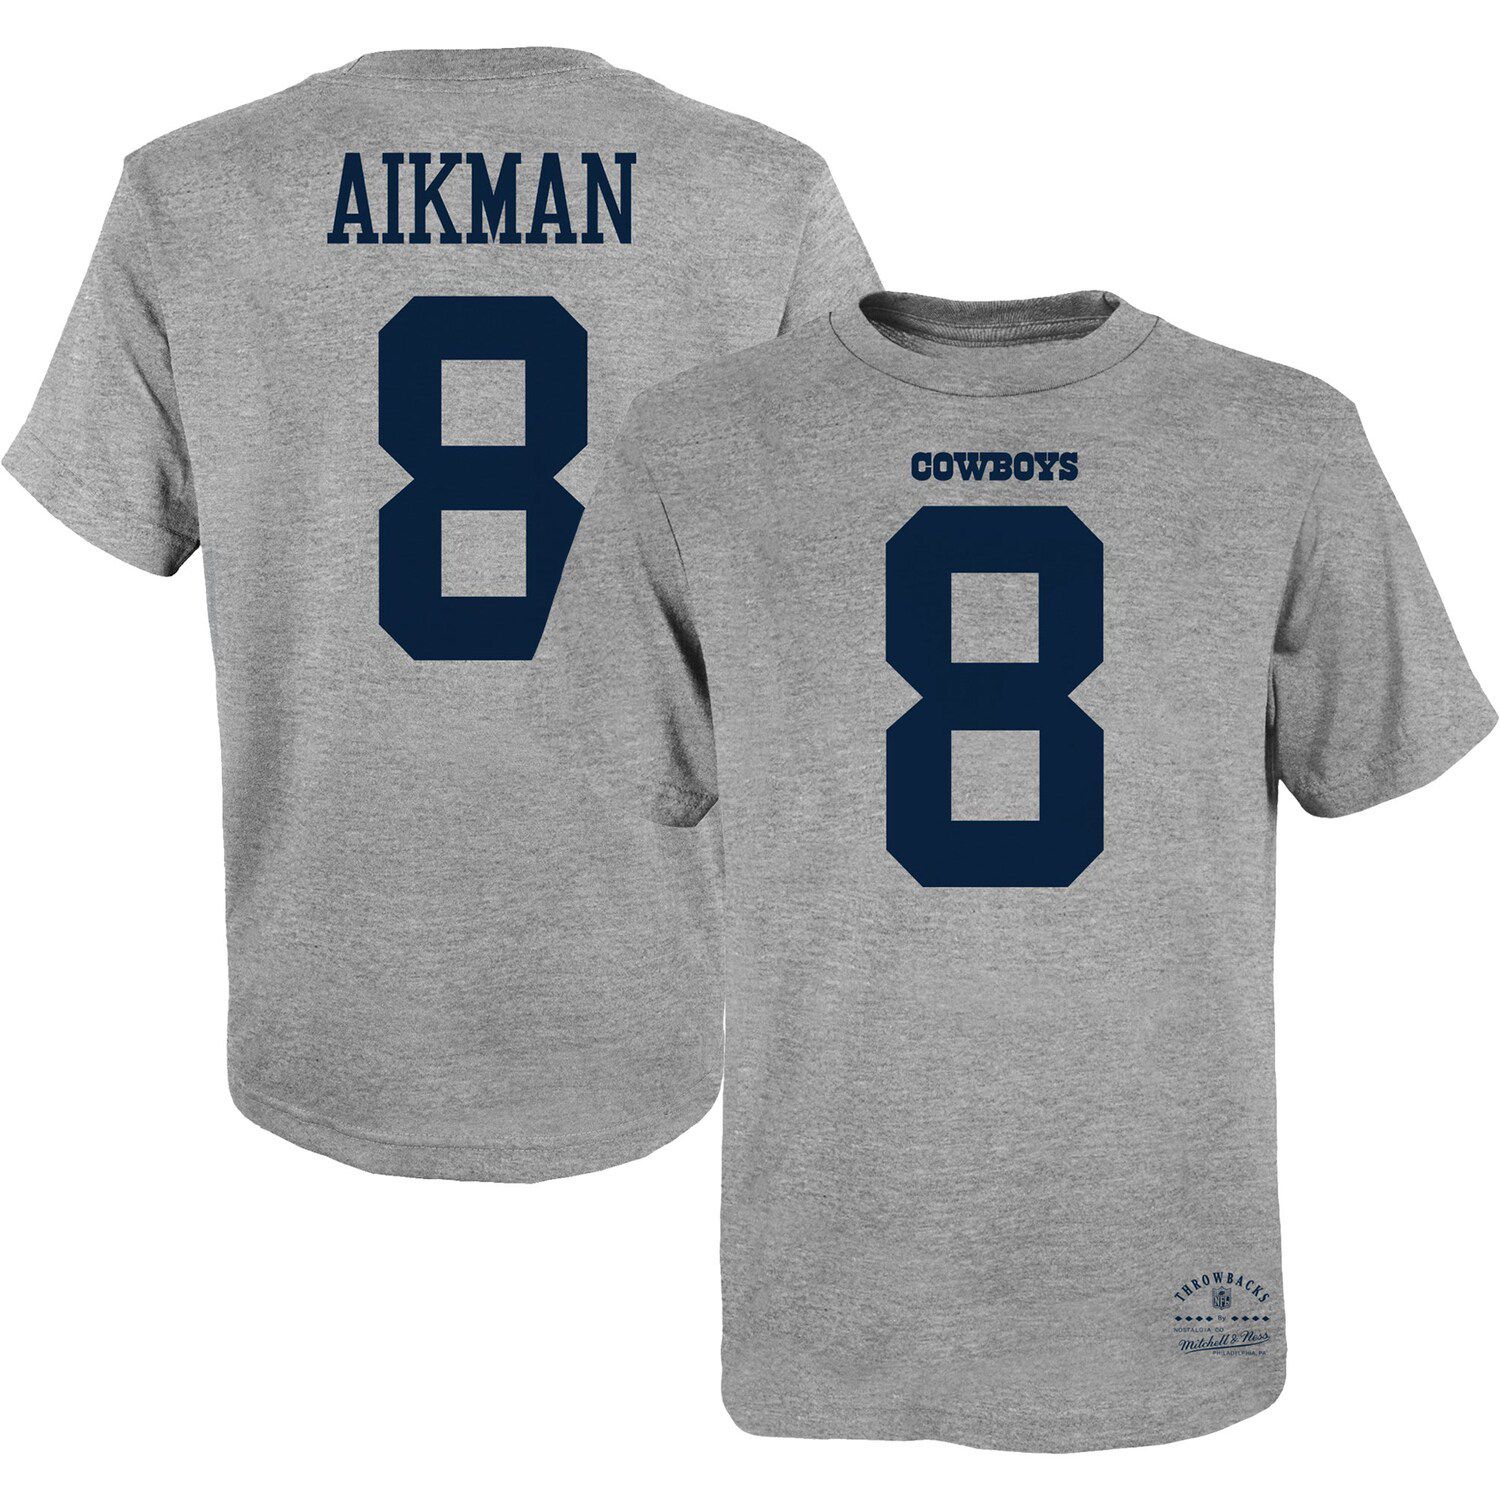 Men's Mitchell & Ness Troy Aikman Navy/White Dallas Cowboys 1995 Authentic Retired Player Jersey